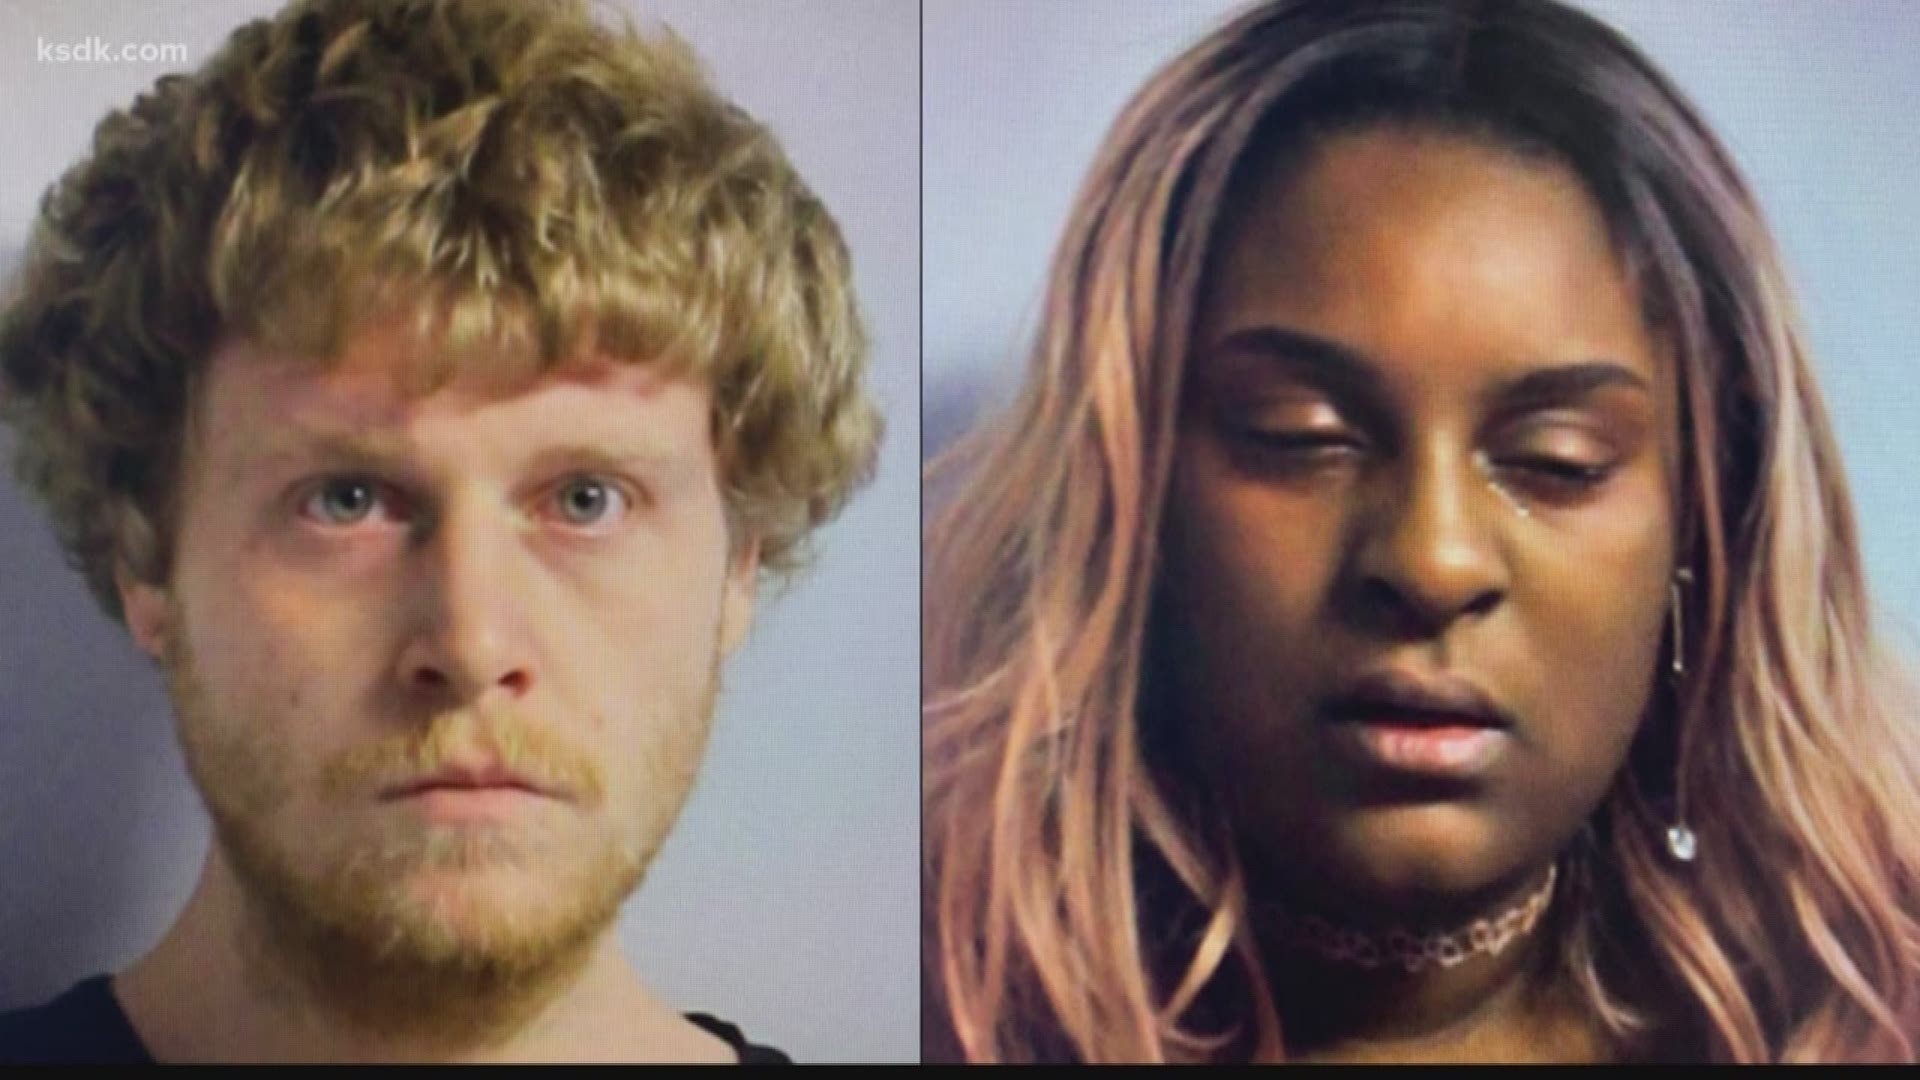 The St. Louis County parents who police say left their child in a car for 16 hours have been charged in the baby's death.